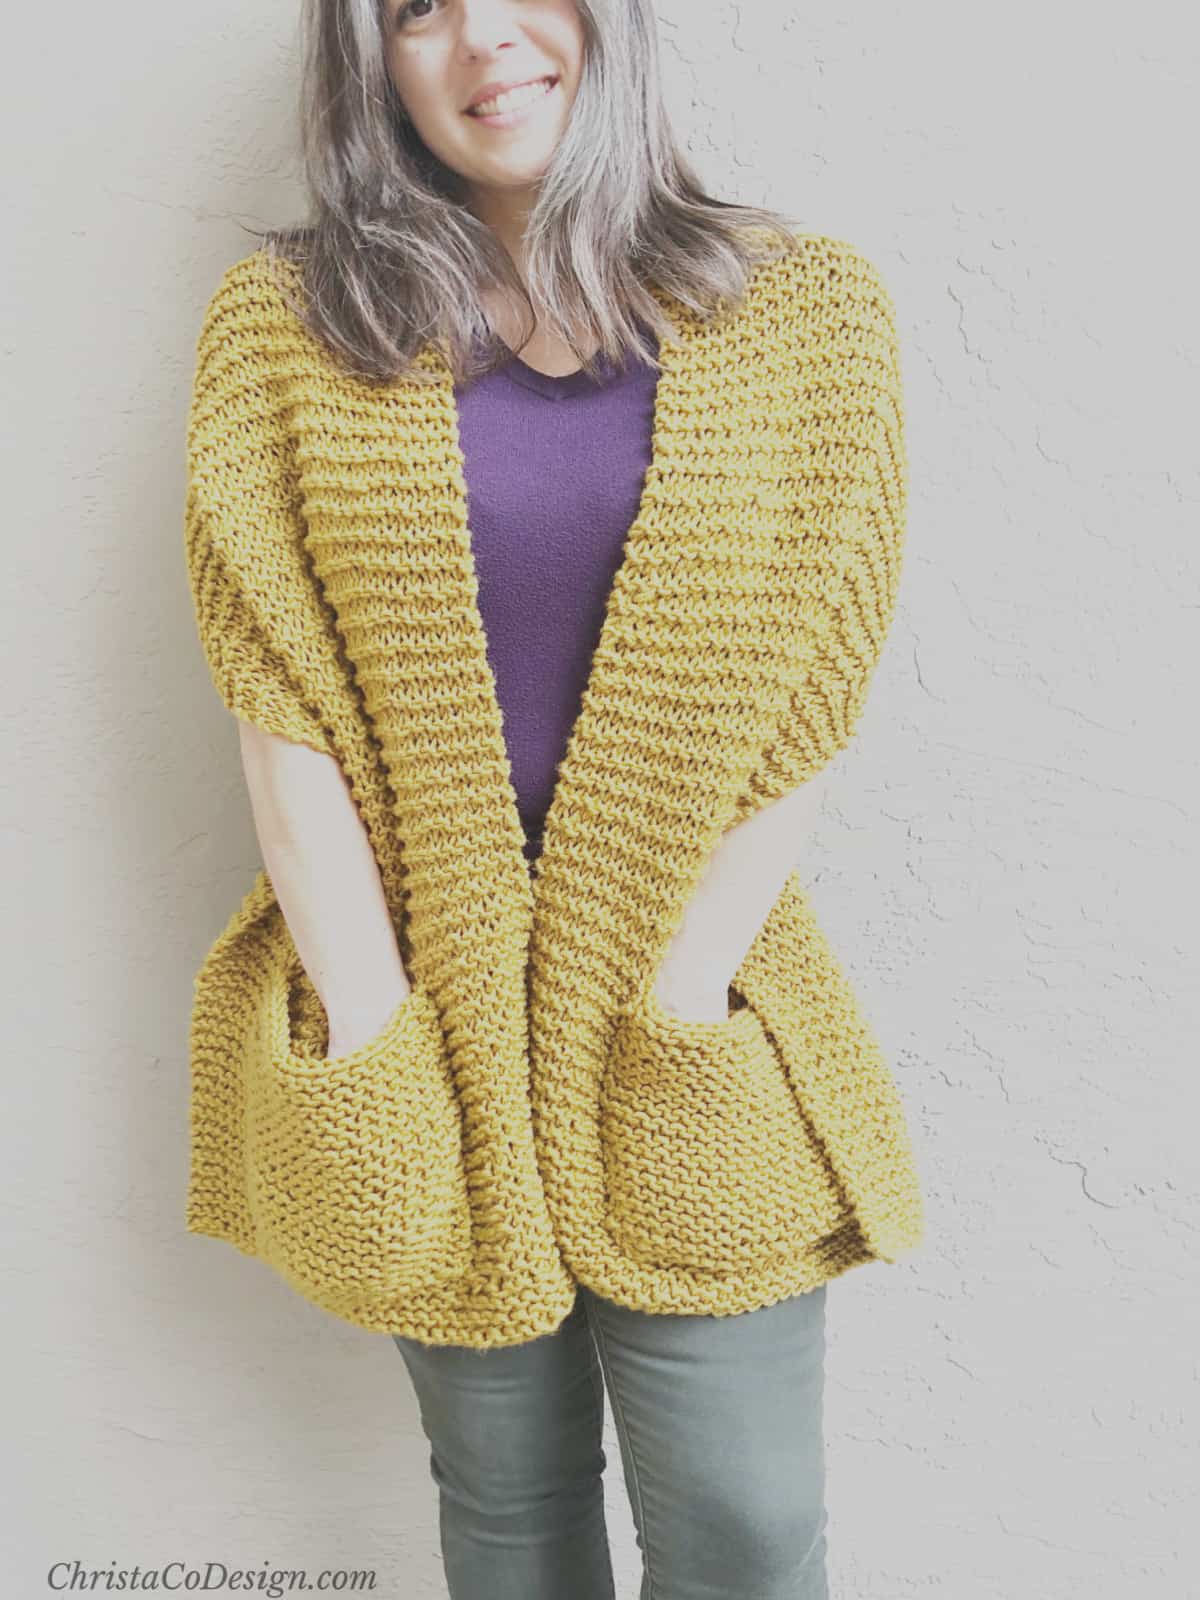 Woman with hands in pockets of mustard knit shawl.